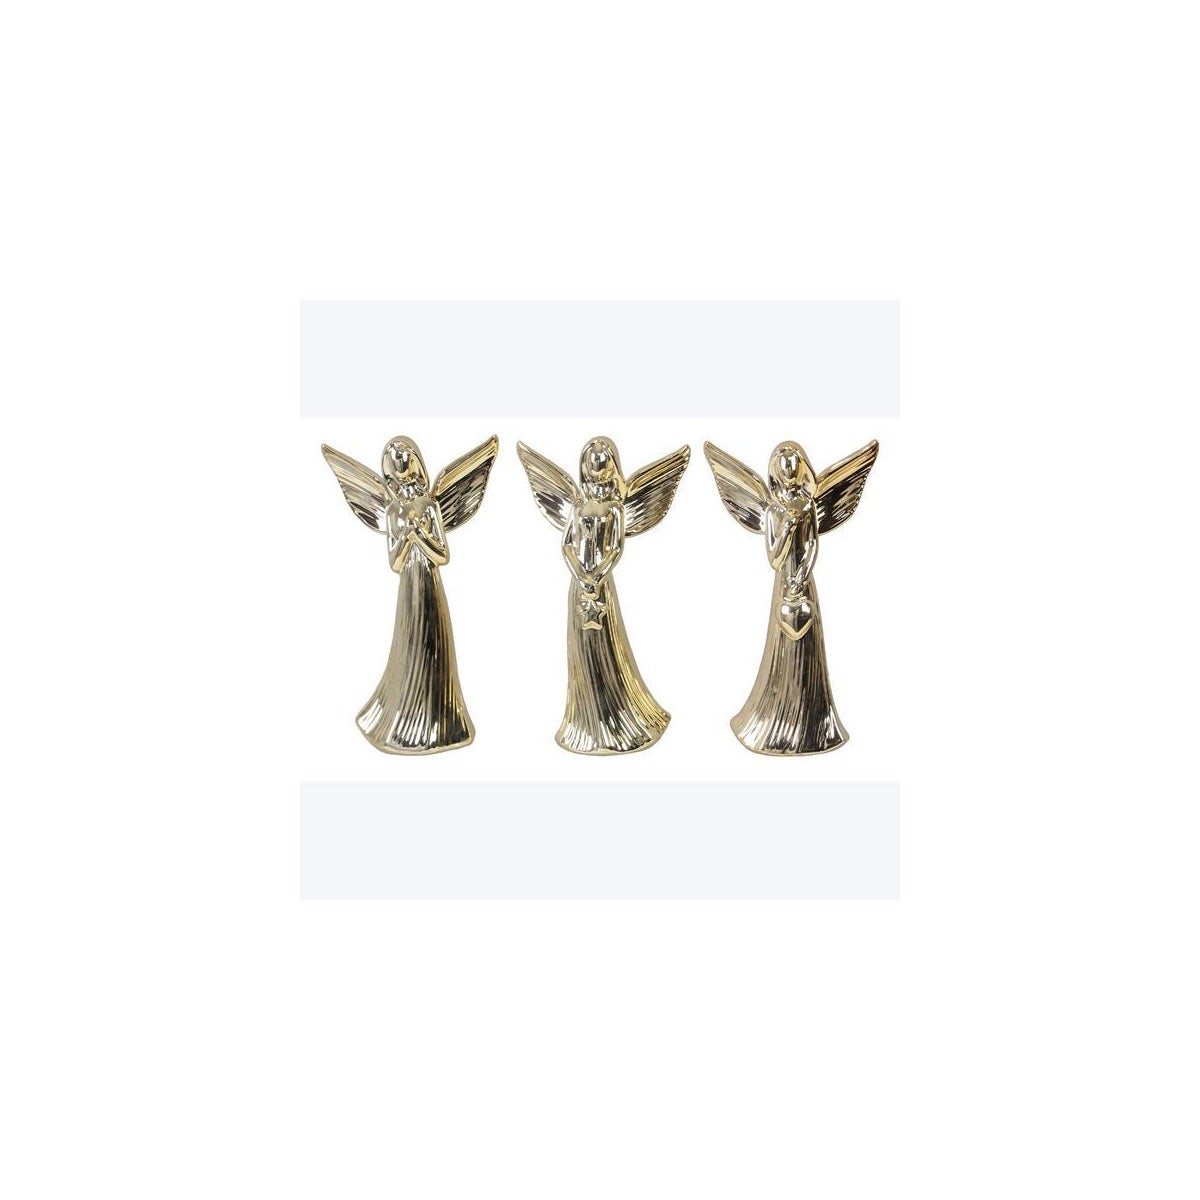 Ceramic Christmas Gold Angels 3 Ast